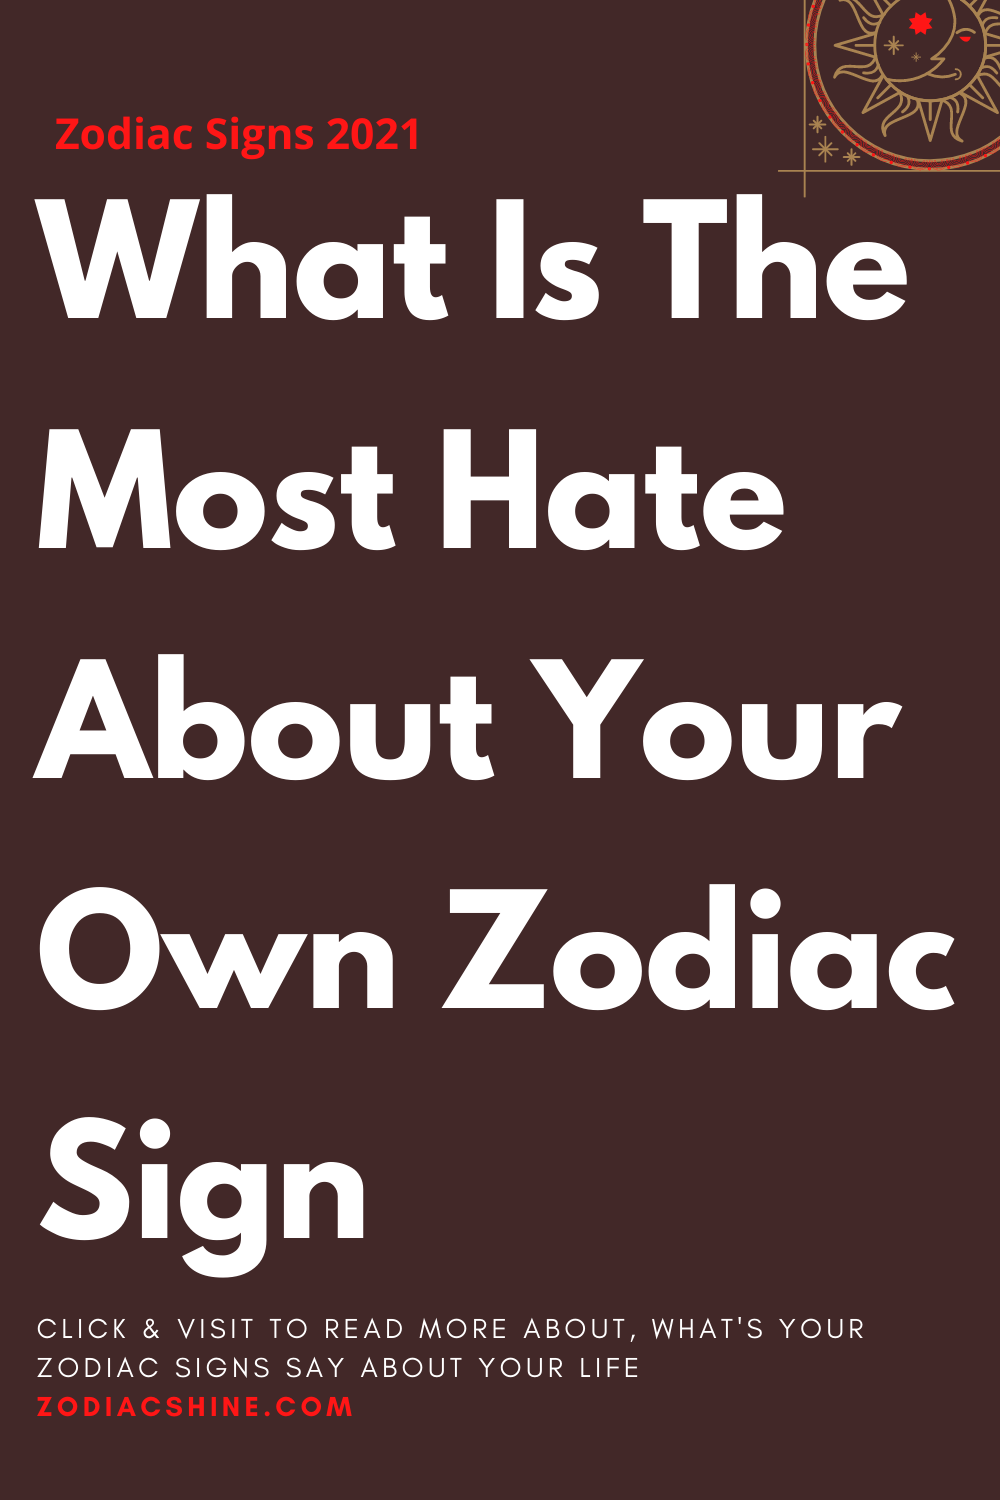 What Is The Most Hate About Your Own Zodiac Sign